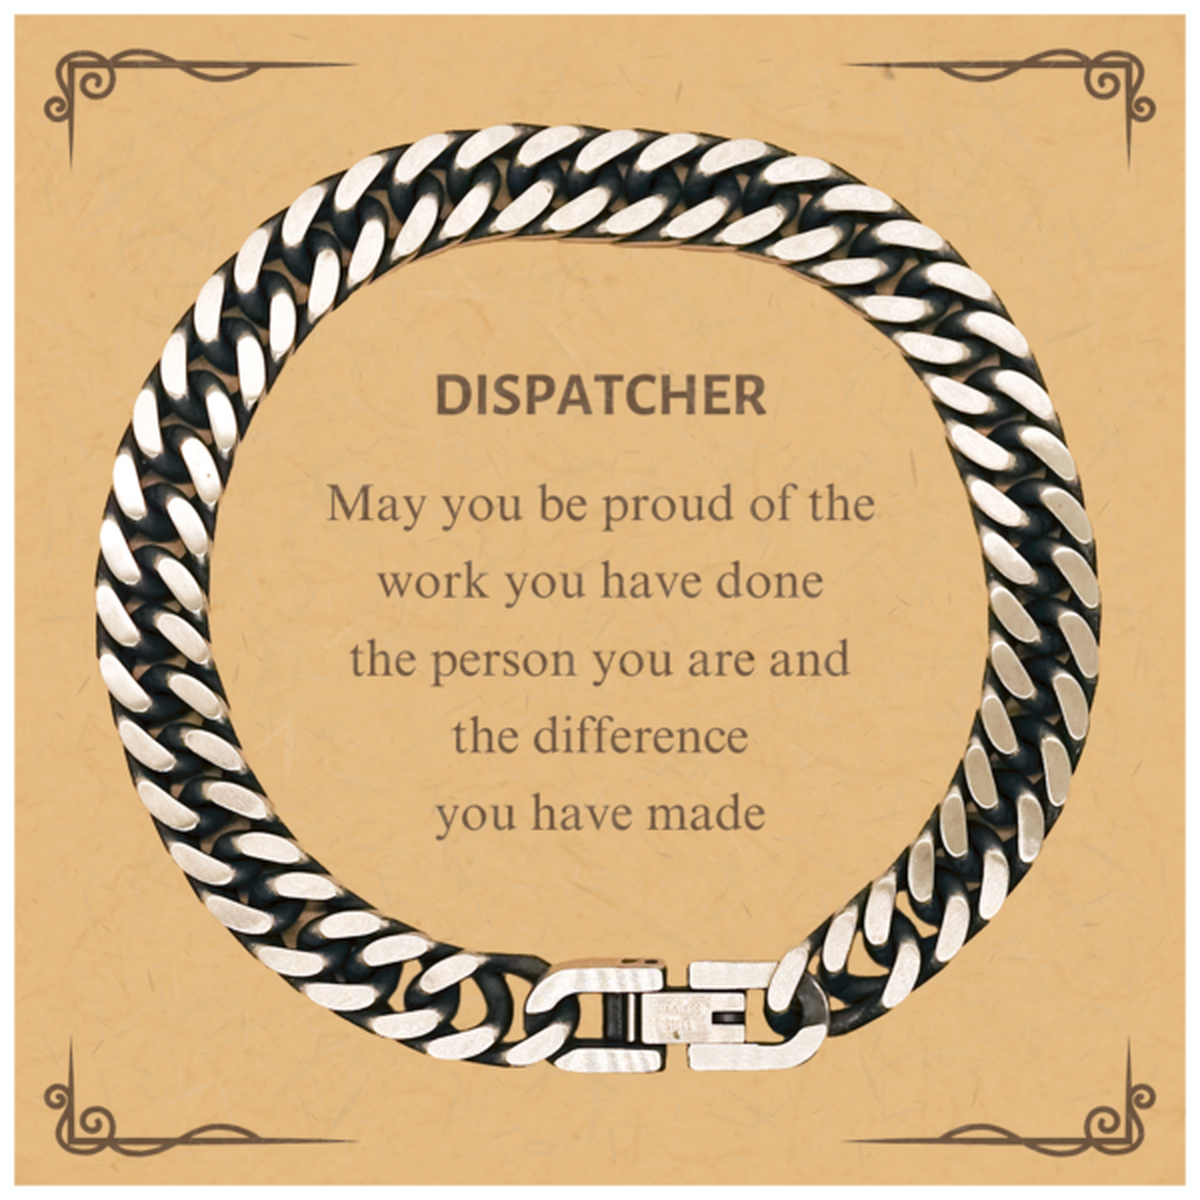 Dispatcher May you be proud of the work you have done, Retirement Dispatcher Cuban Link Chain Bracelet for Colleague Appreciation Gifts Amazing for Dispatcher